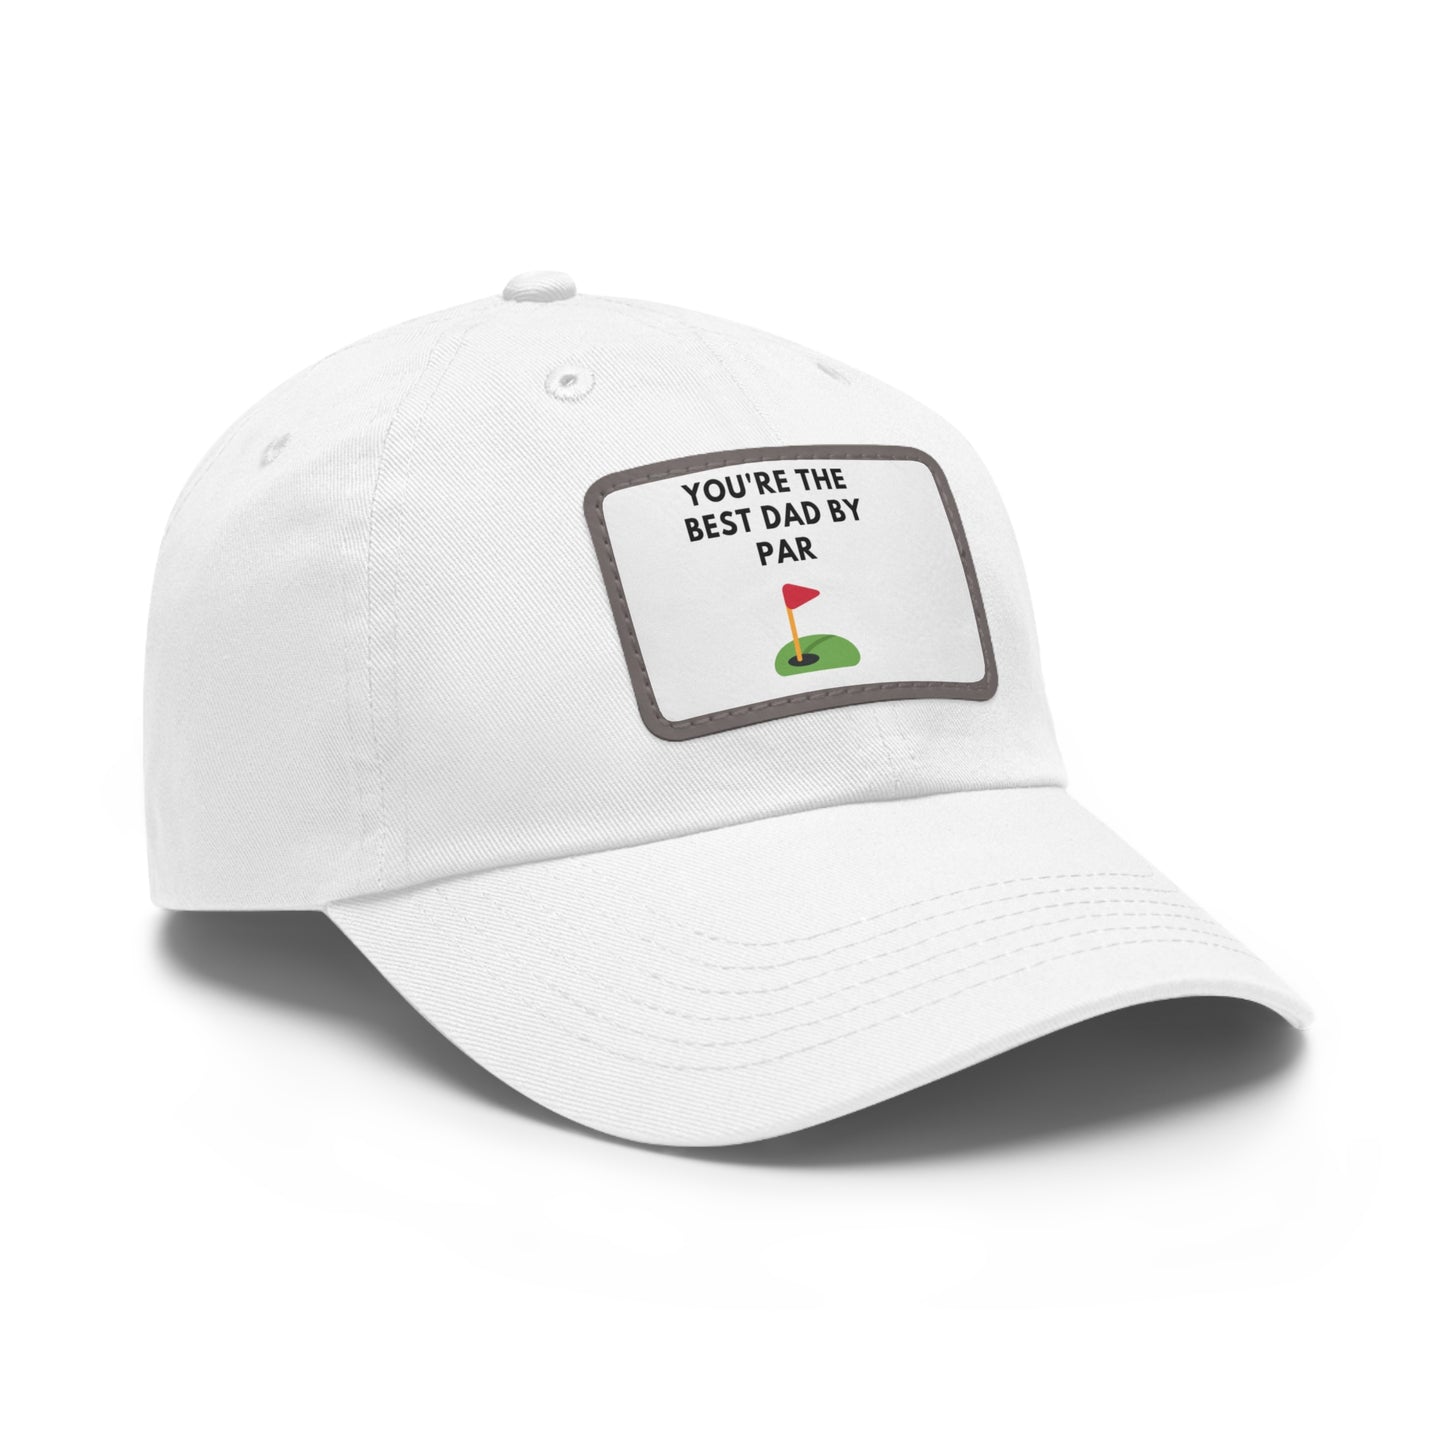 You're the best dad by par fathers day golf Dad Hat with Leather Patch (Rectangle)